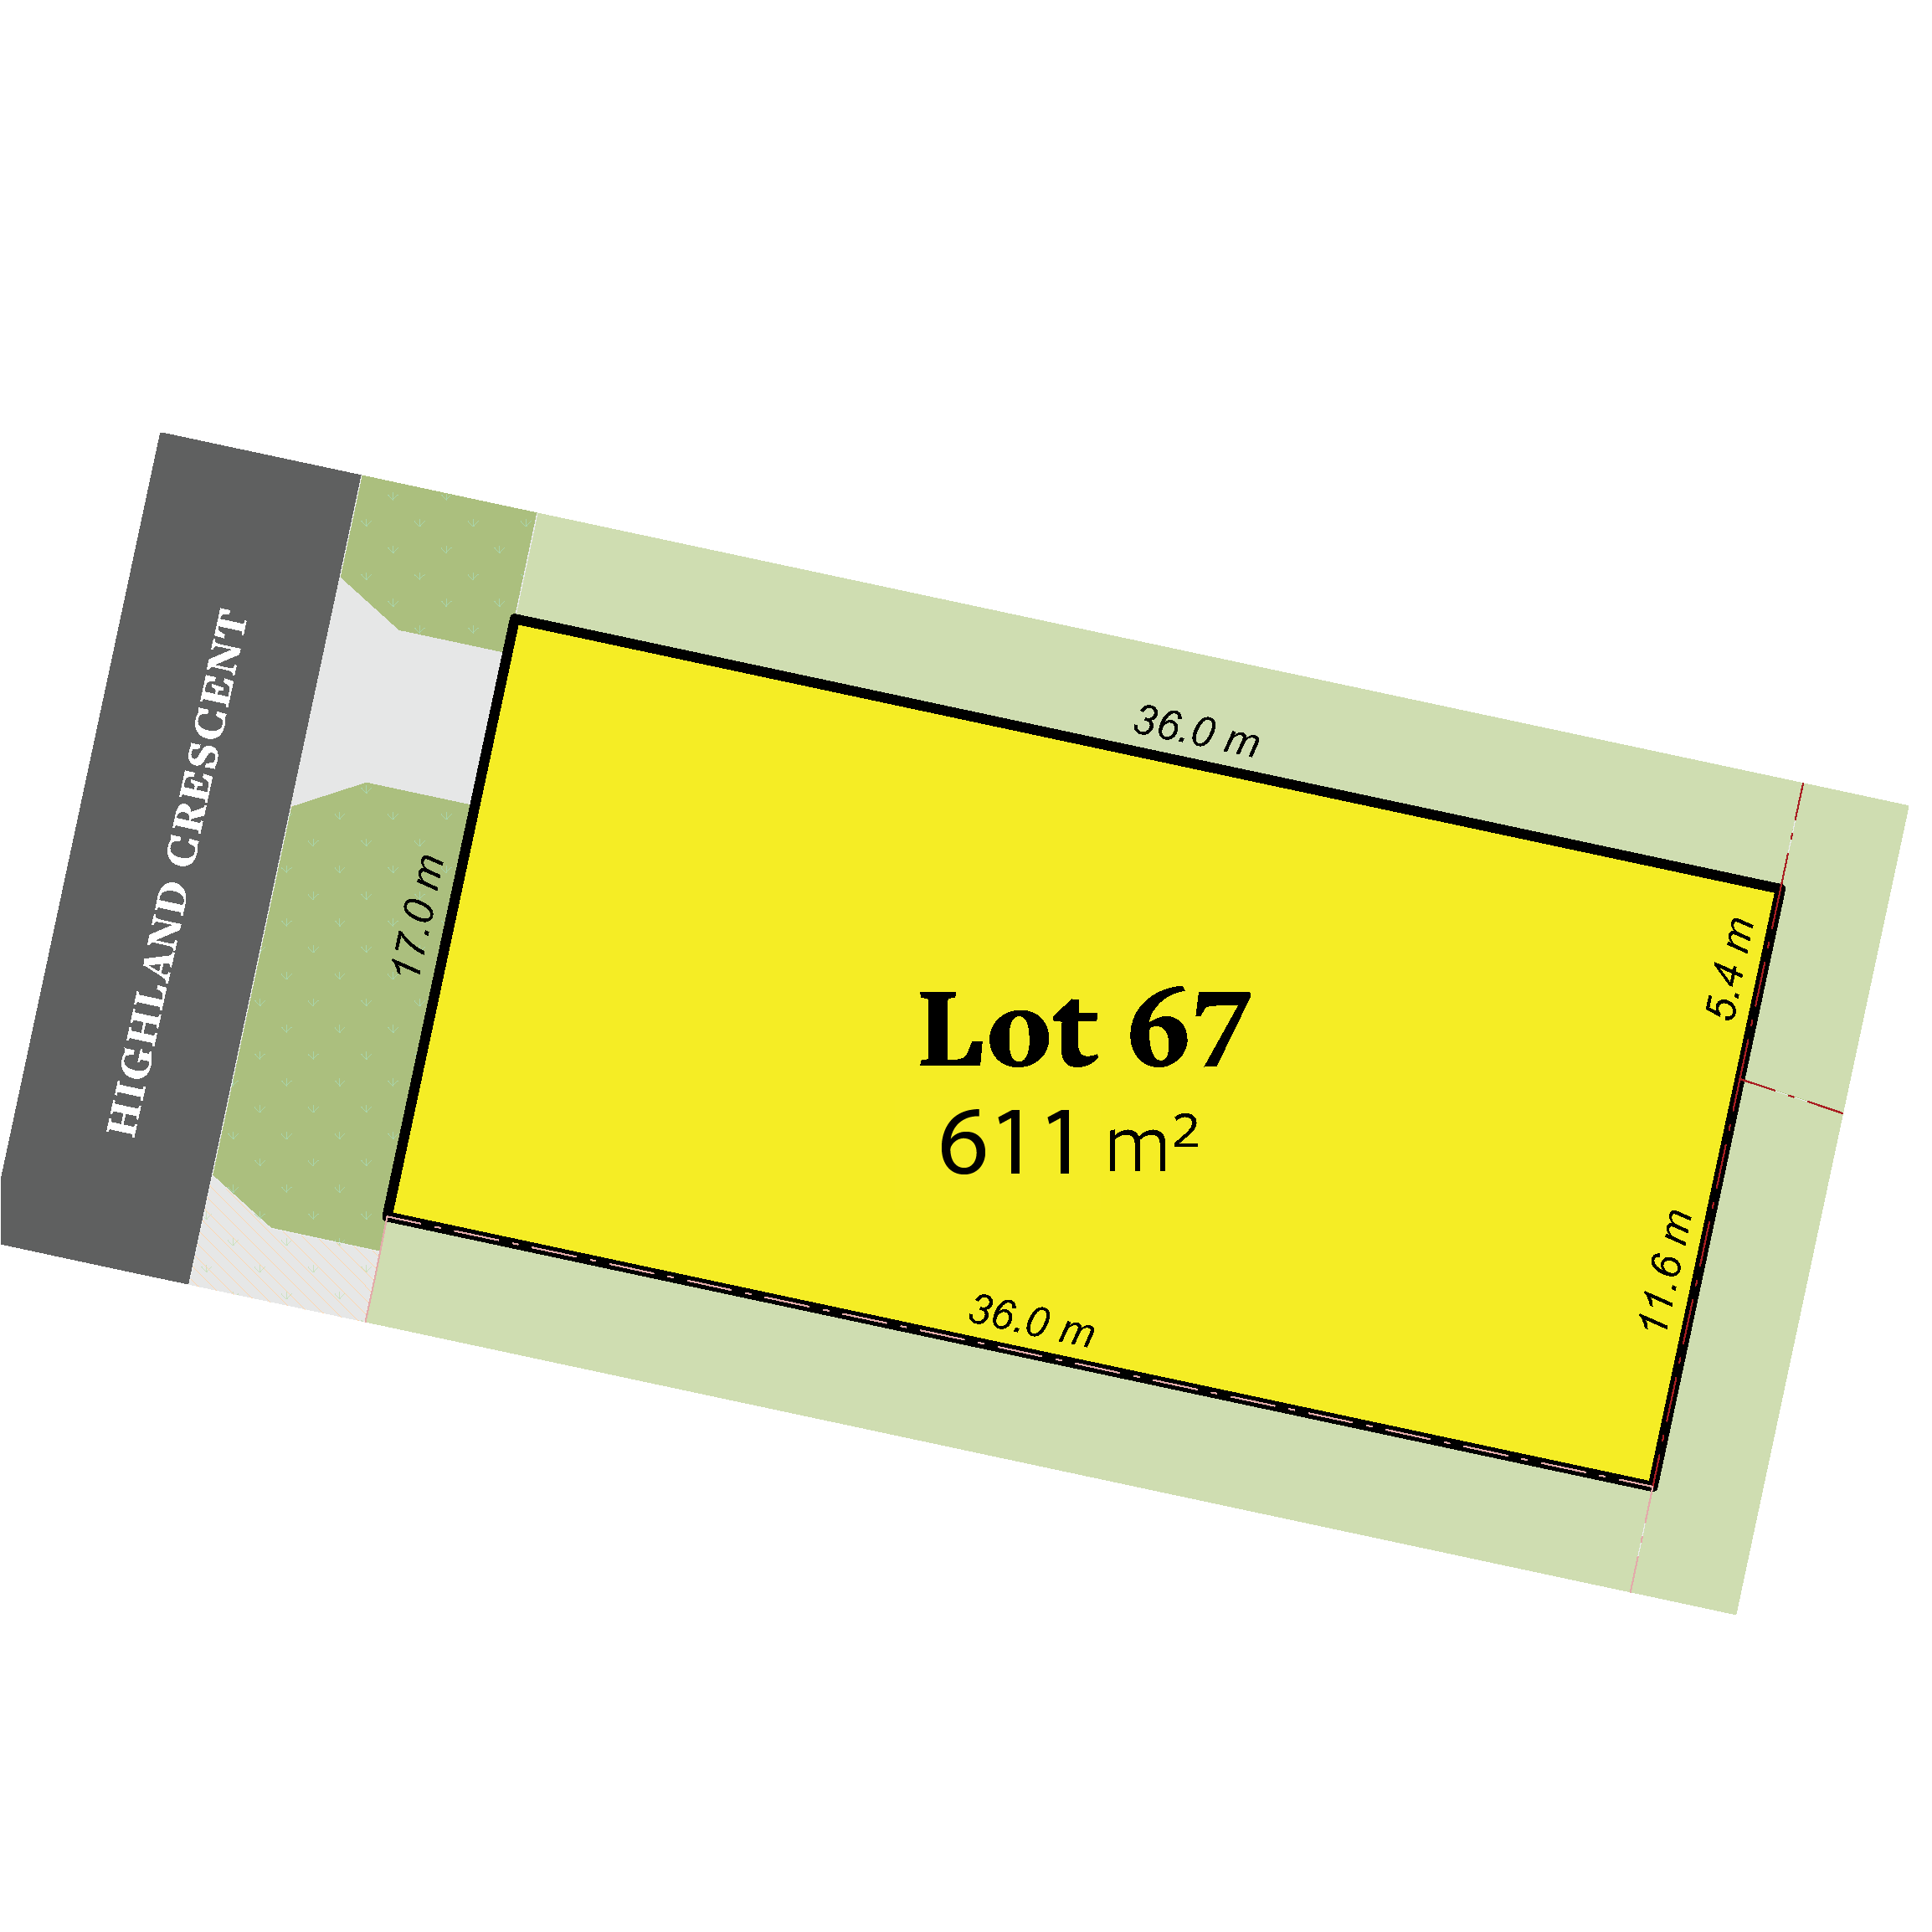 Image of Lot 67